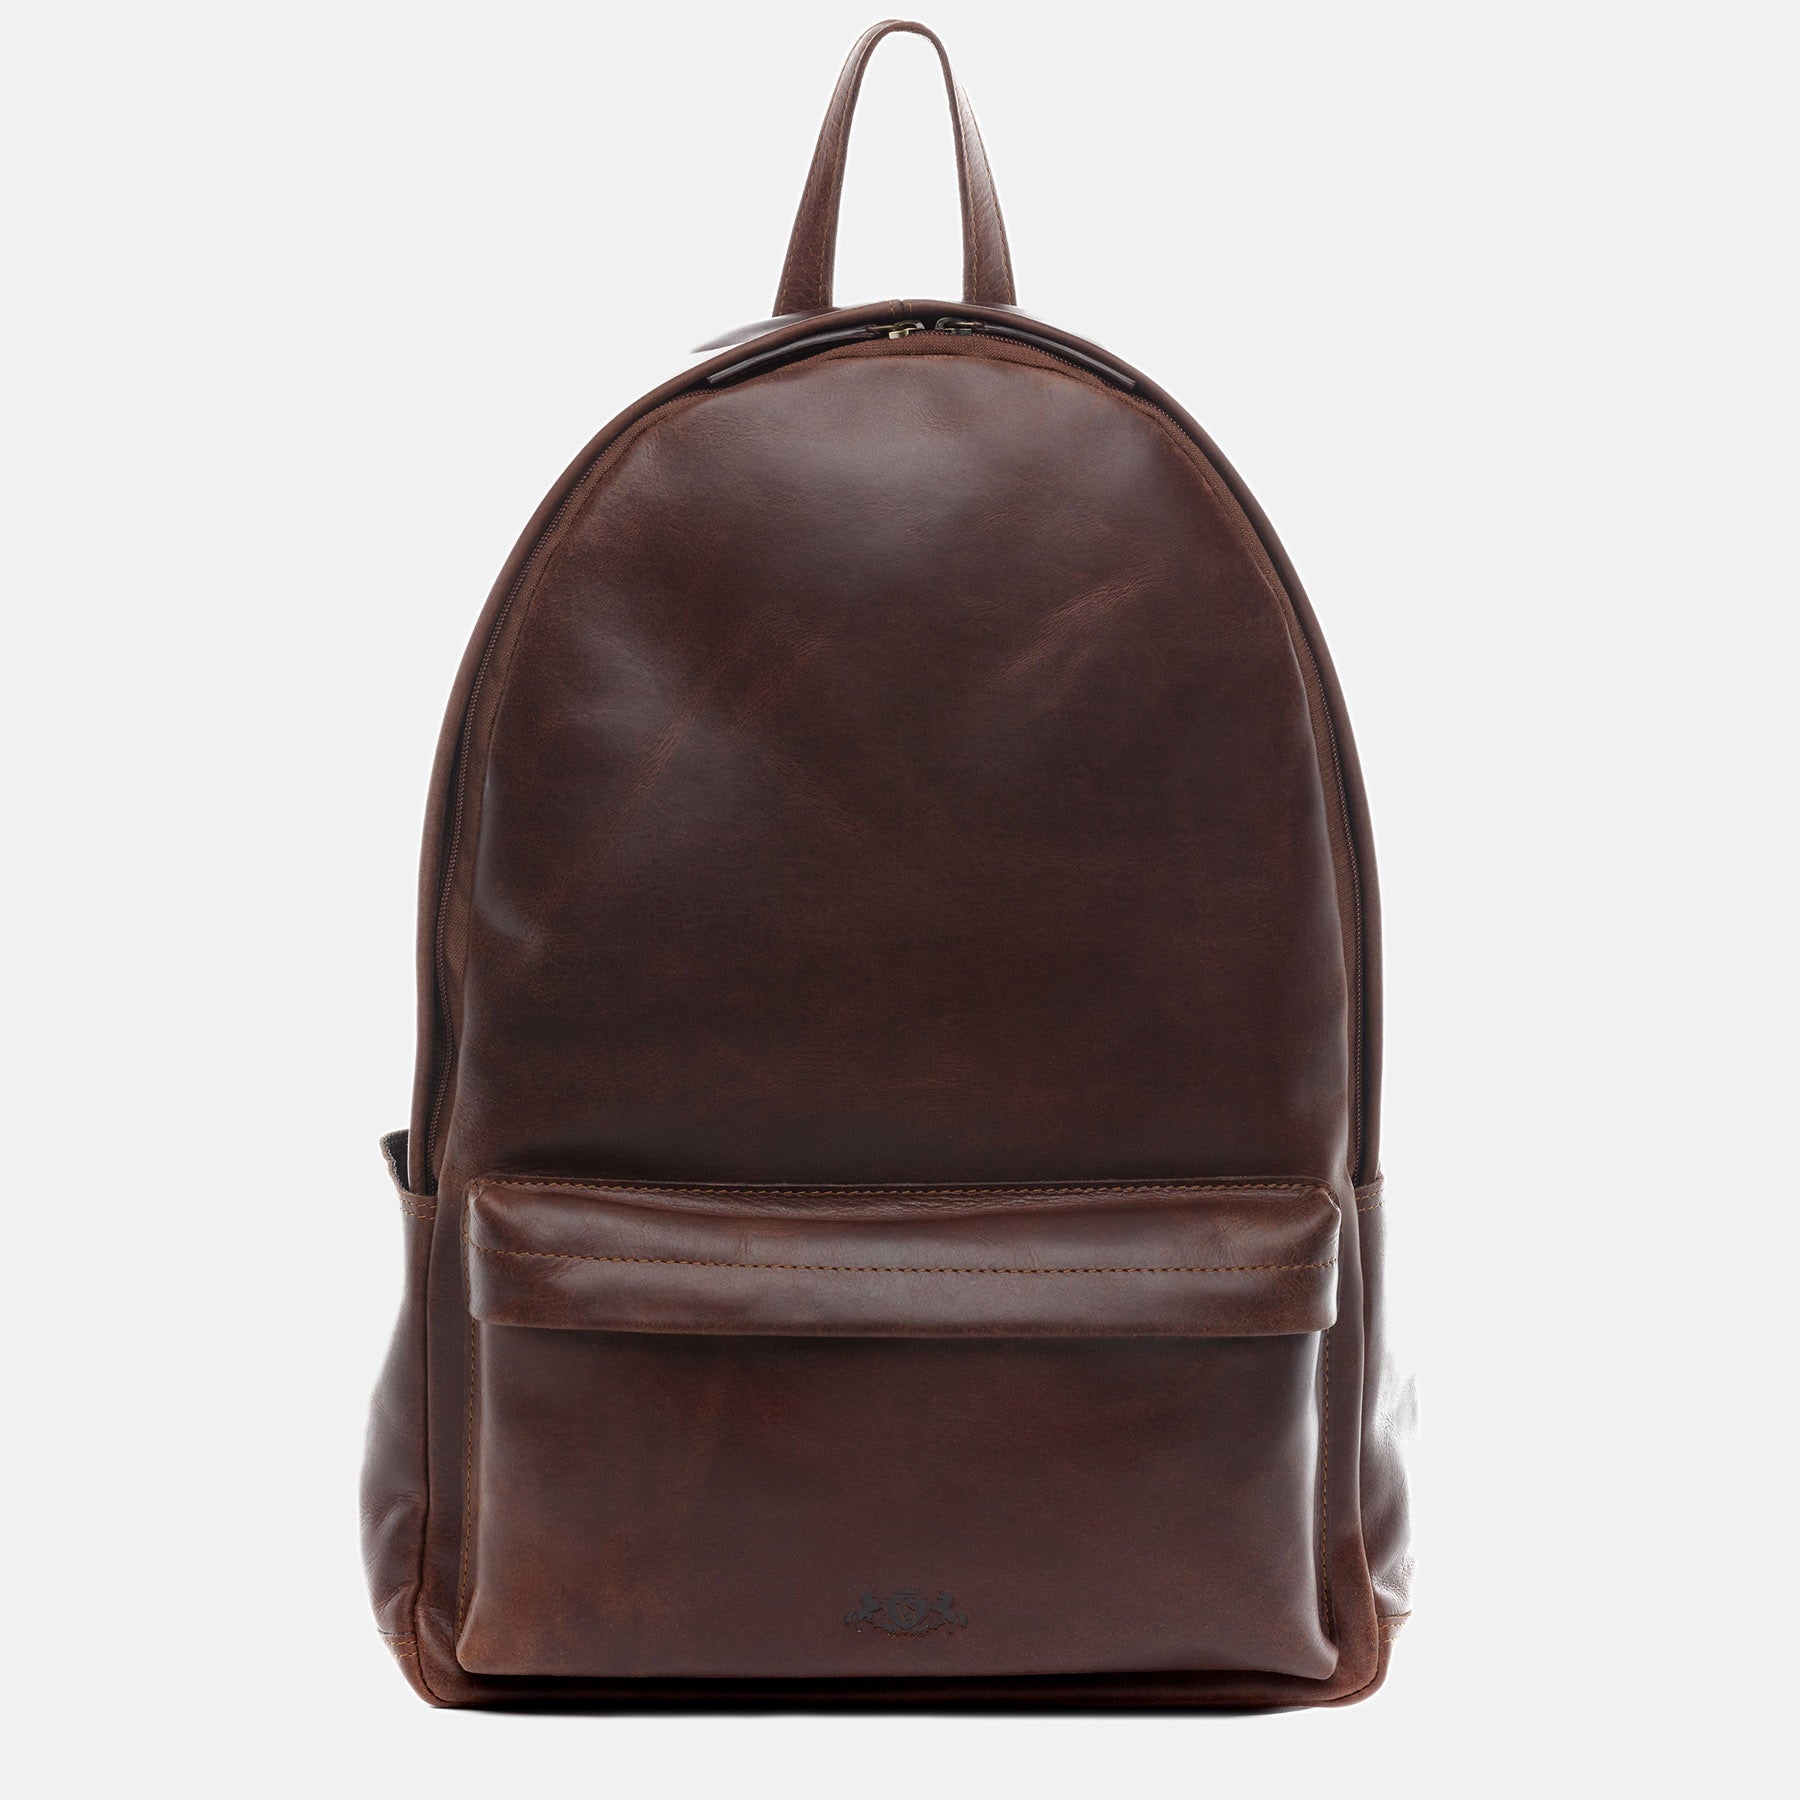 XL Backpack ARCHIE natural leather brown-cognac